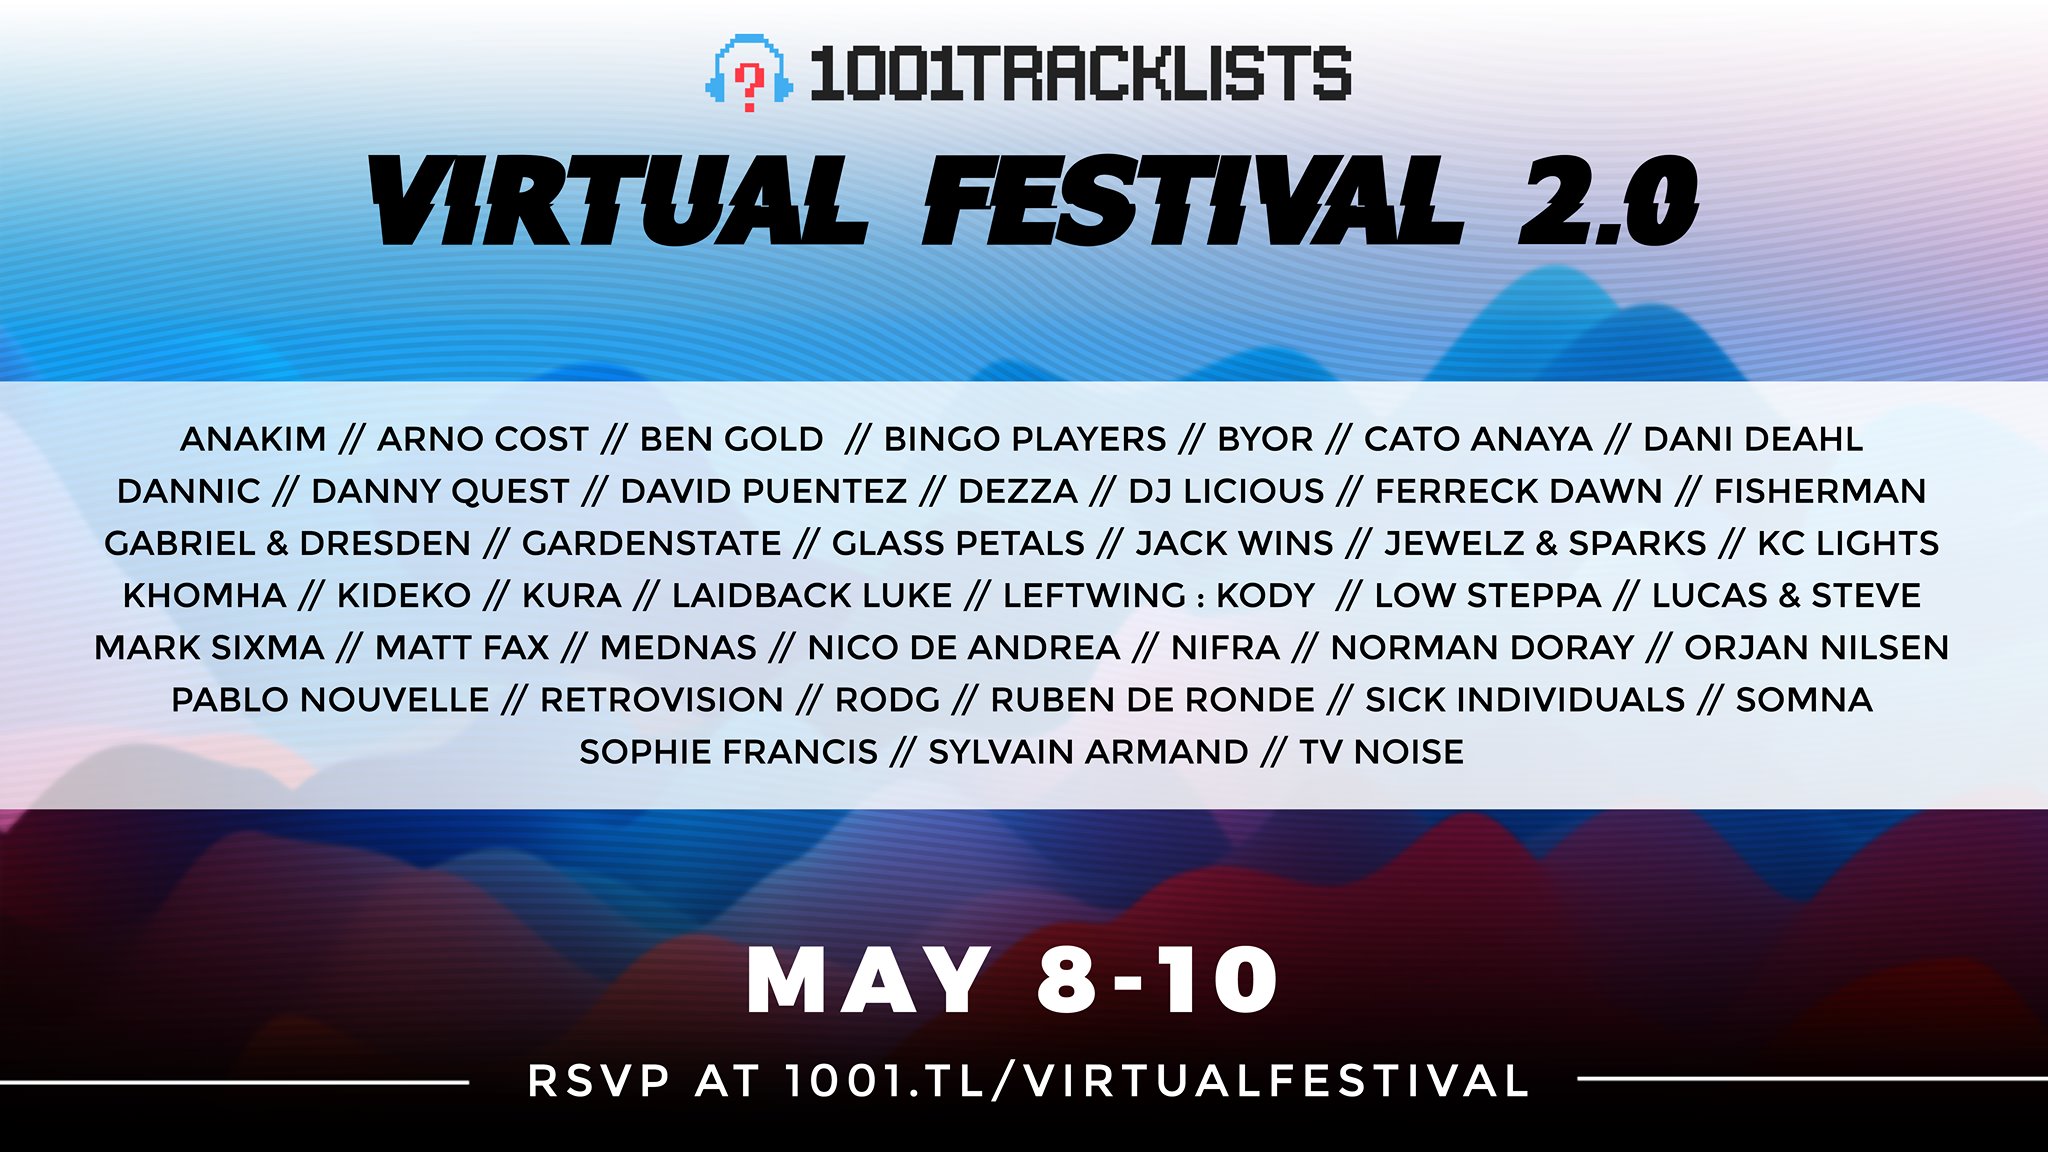 1001tracklists Virtual Festival 2 0 Livestream Schedule Watch Inside Edm Identity The world's leading dj tracklist database @1001tracklists | our 2020 a state of dance music report is out now. 1001tracklists virtual festival 2 0